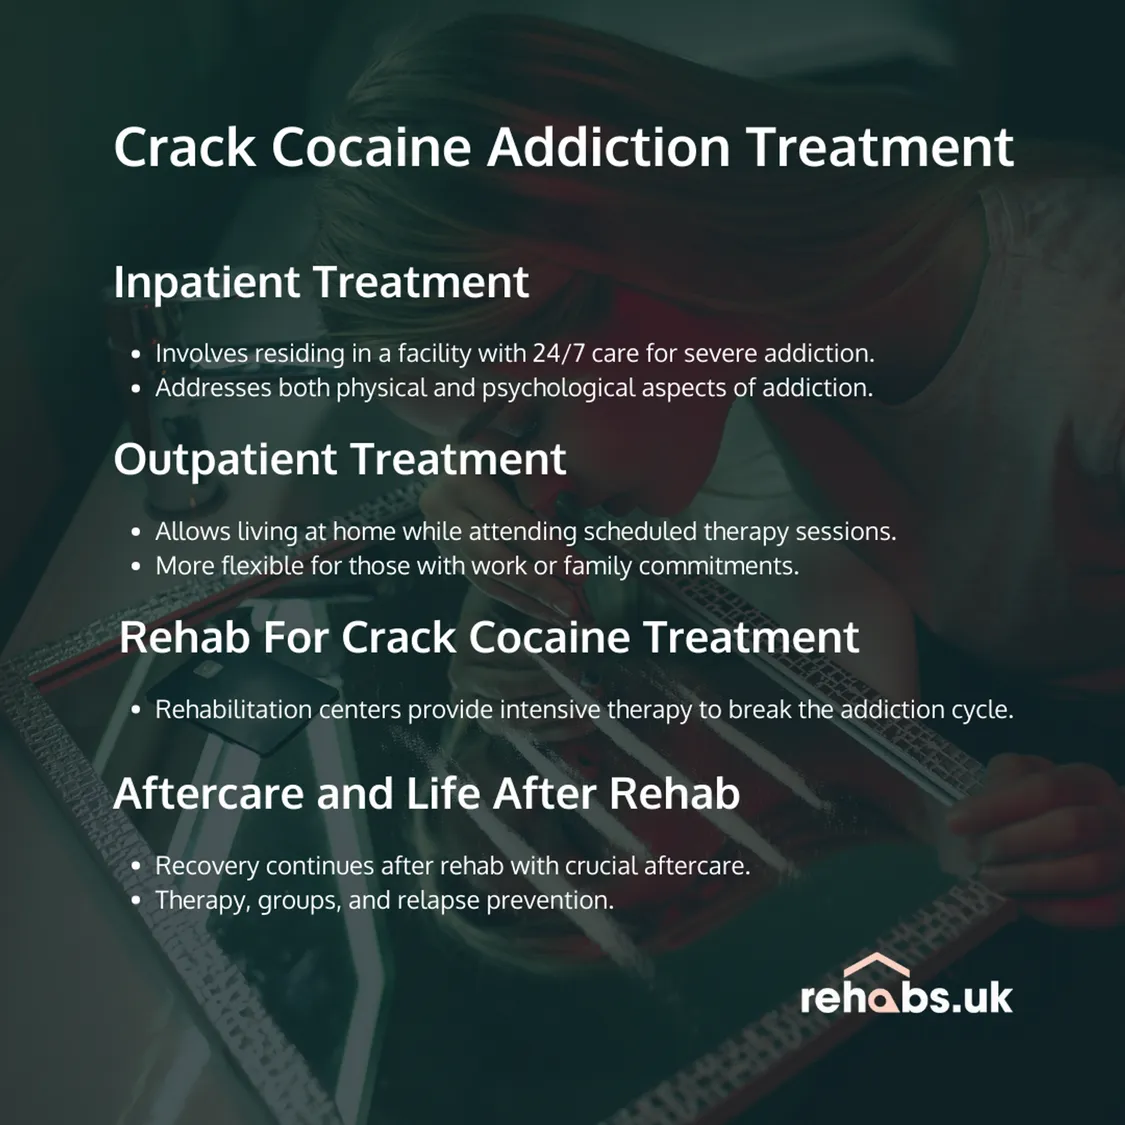 Infographic showing the various forms of Crack Cocaine Addiction Treatment